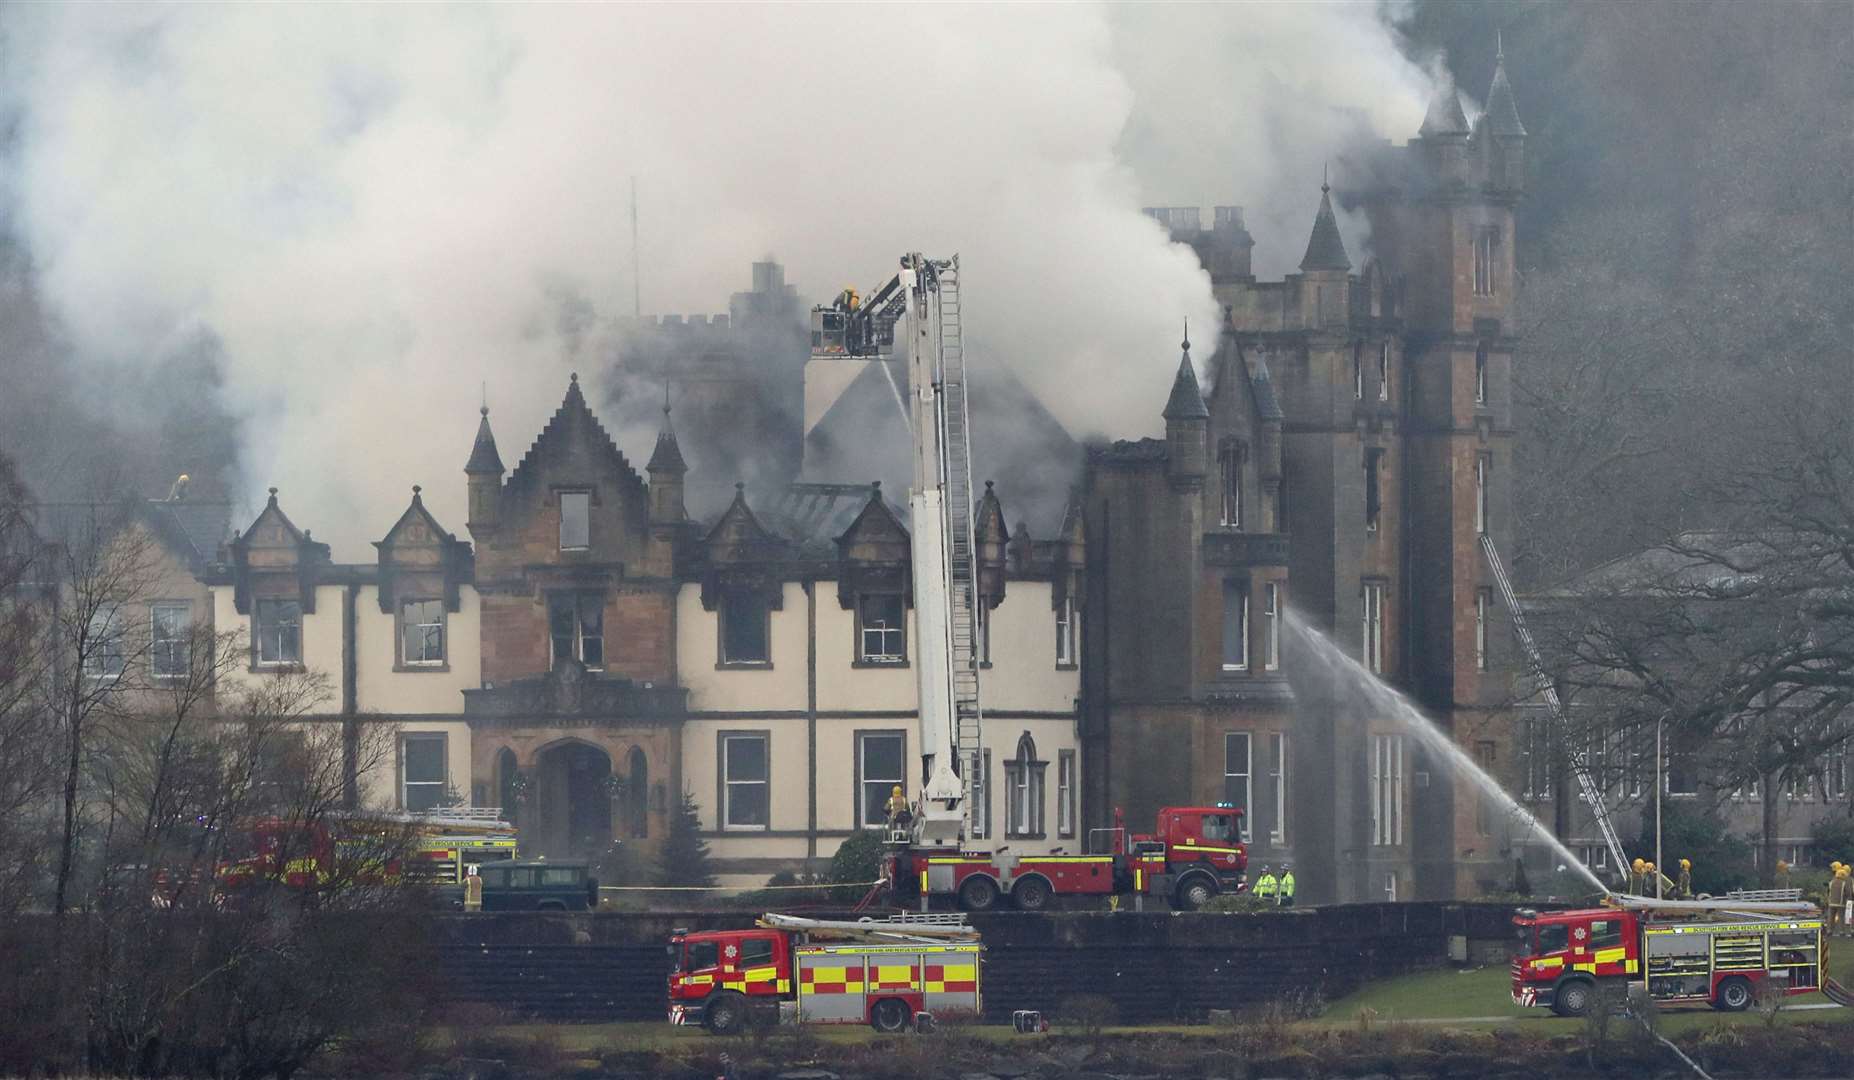 The Cameron House hotel was severely damaged by the blaze in which two men died (Andrew Milligan/PA)